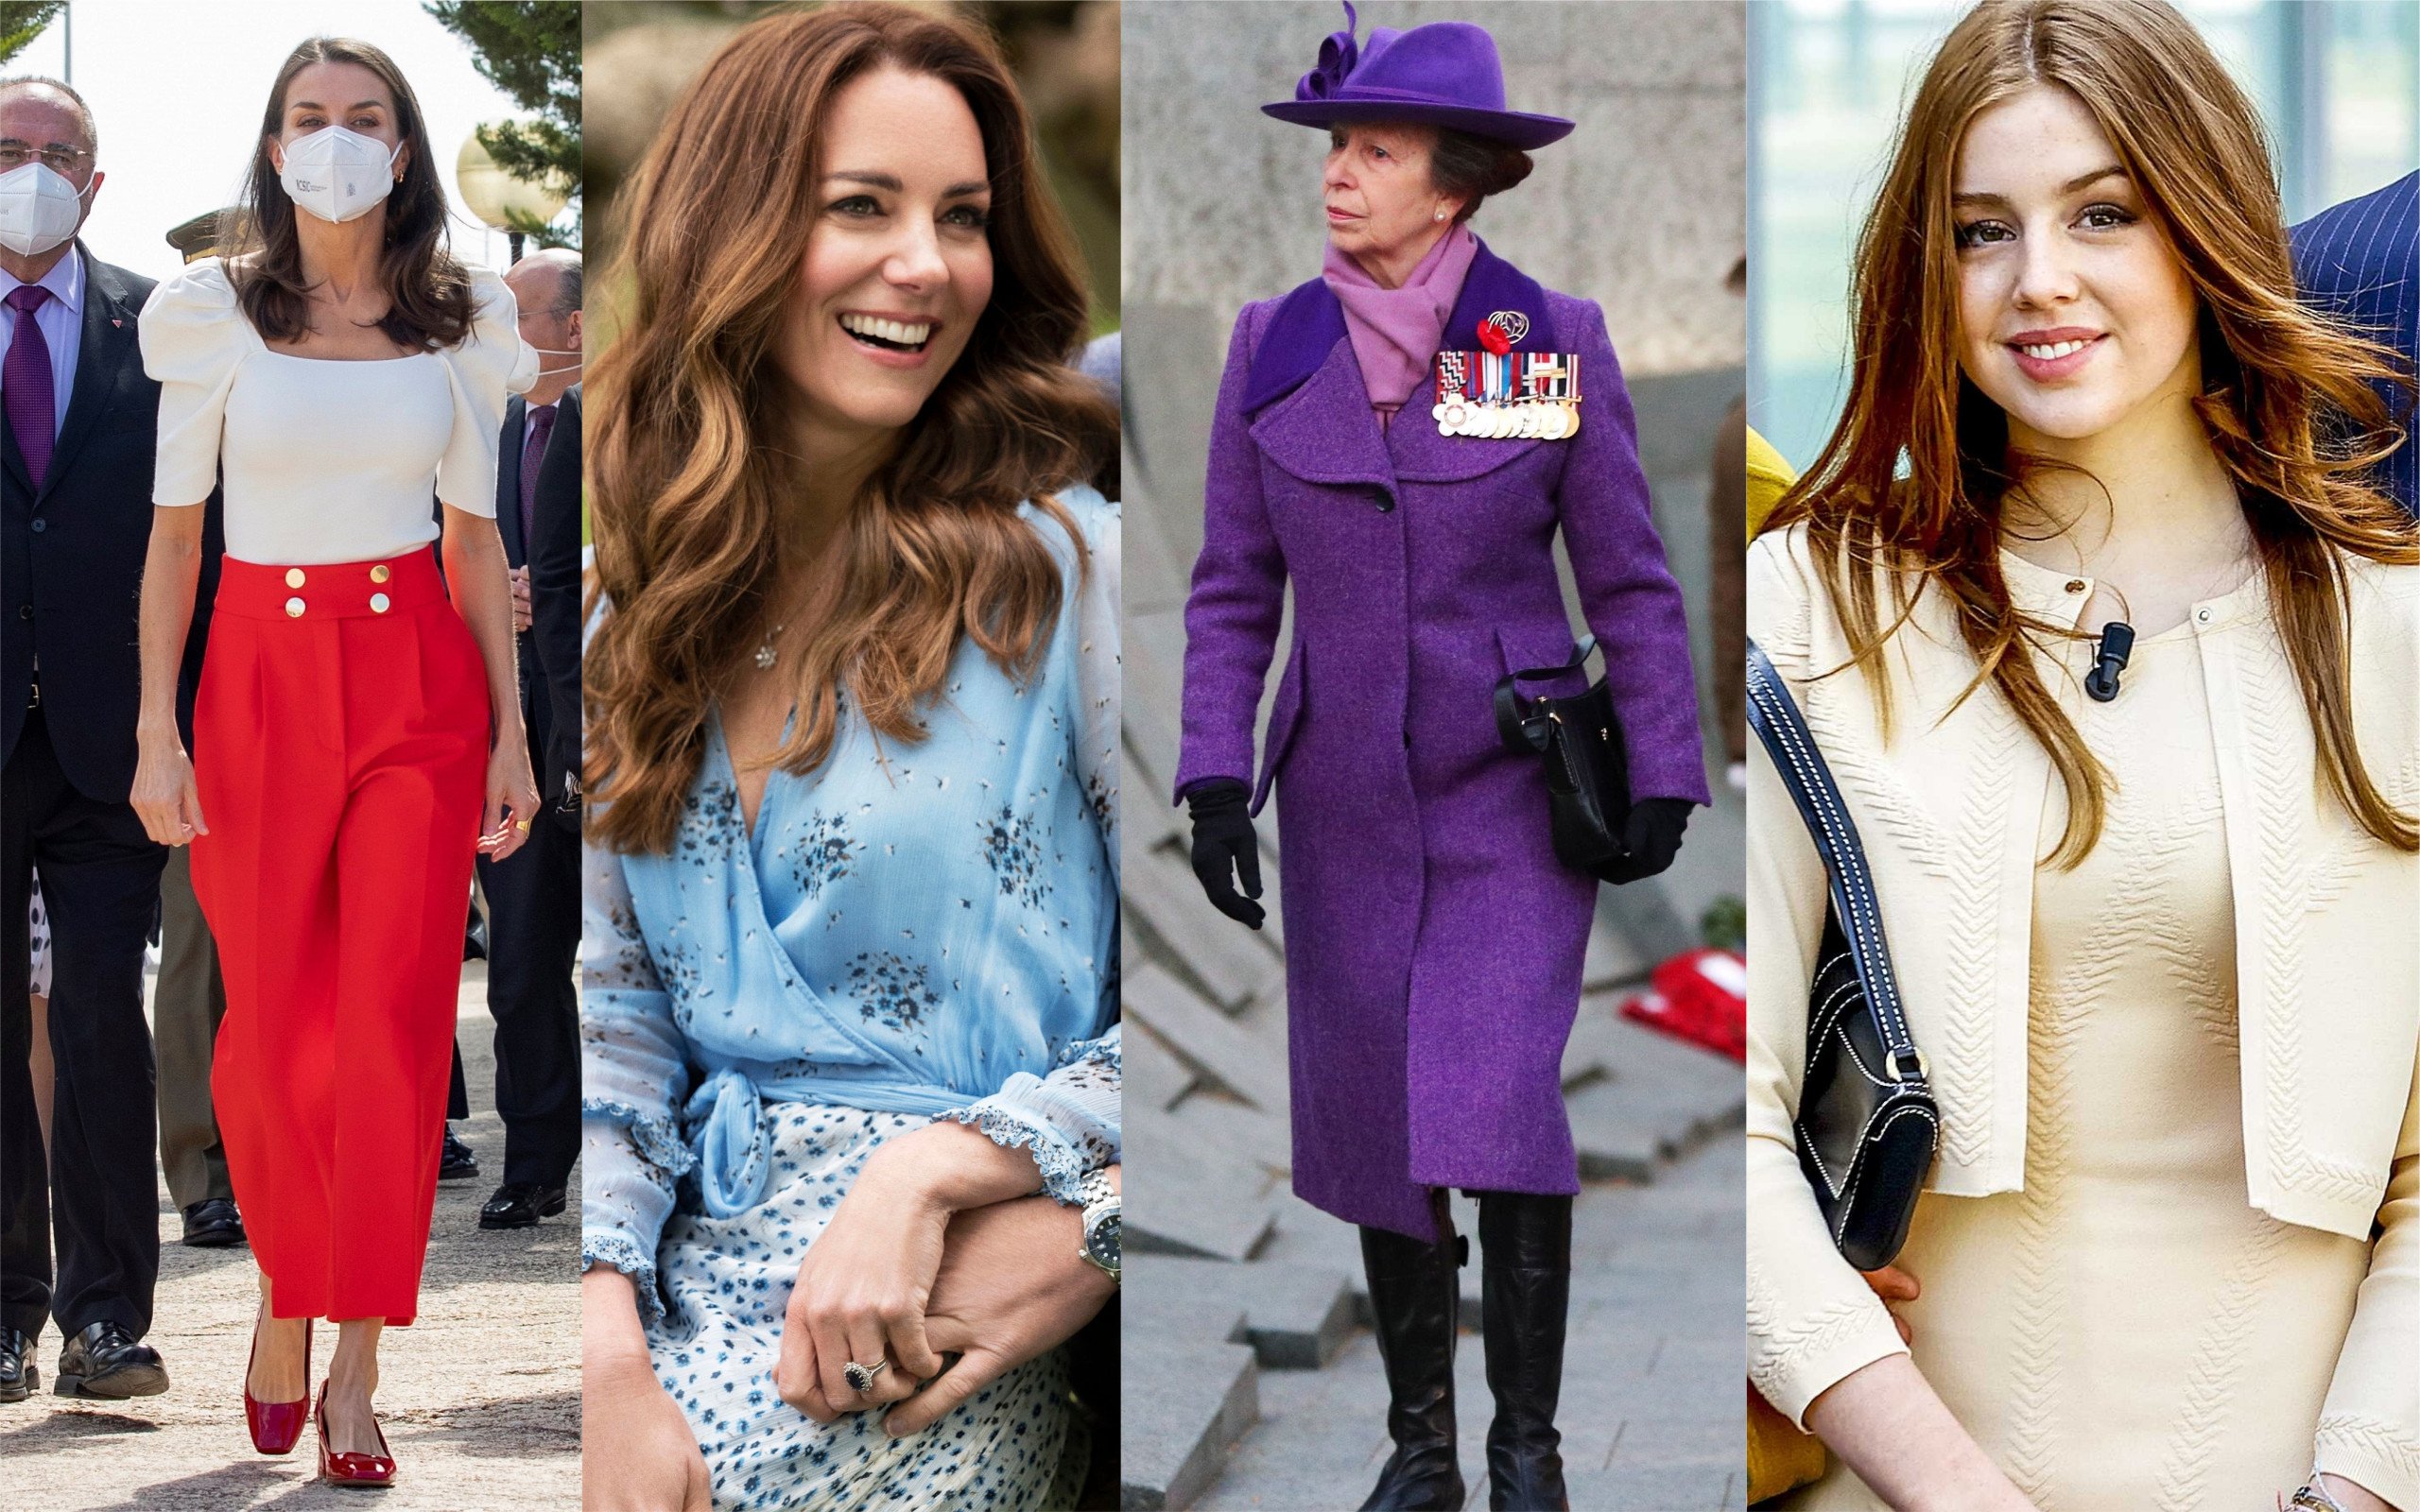 From left, Spain’s Queen Letizia; British royals Kate Middleton, Duchess of Cambridge, and Princess Anne; and the Netherlands’ Princess Alexia are among royalty showing off their fashion sense. Photo: Wires 